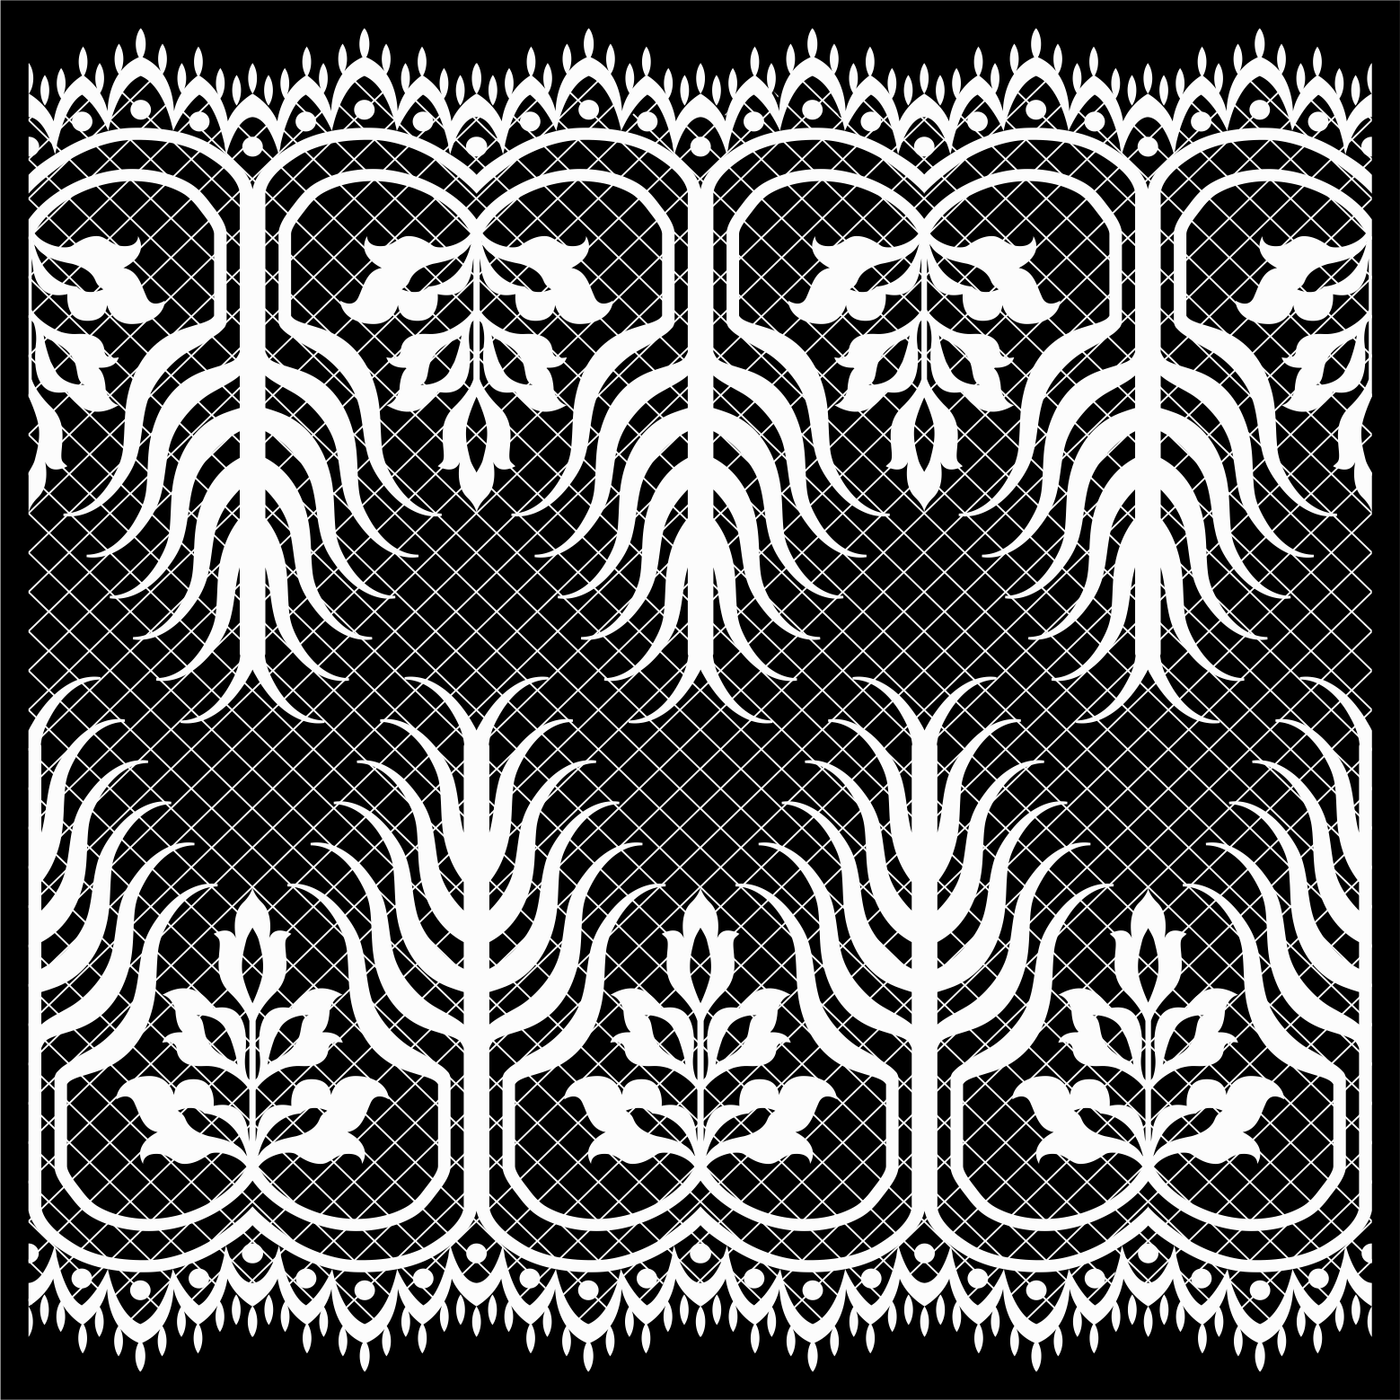 Adhesive Patterned Vinyl - White Ink Lace 11